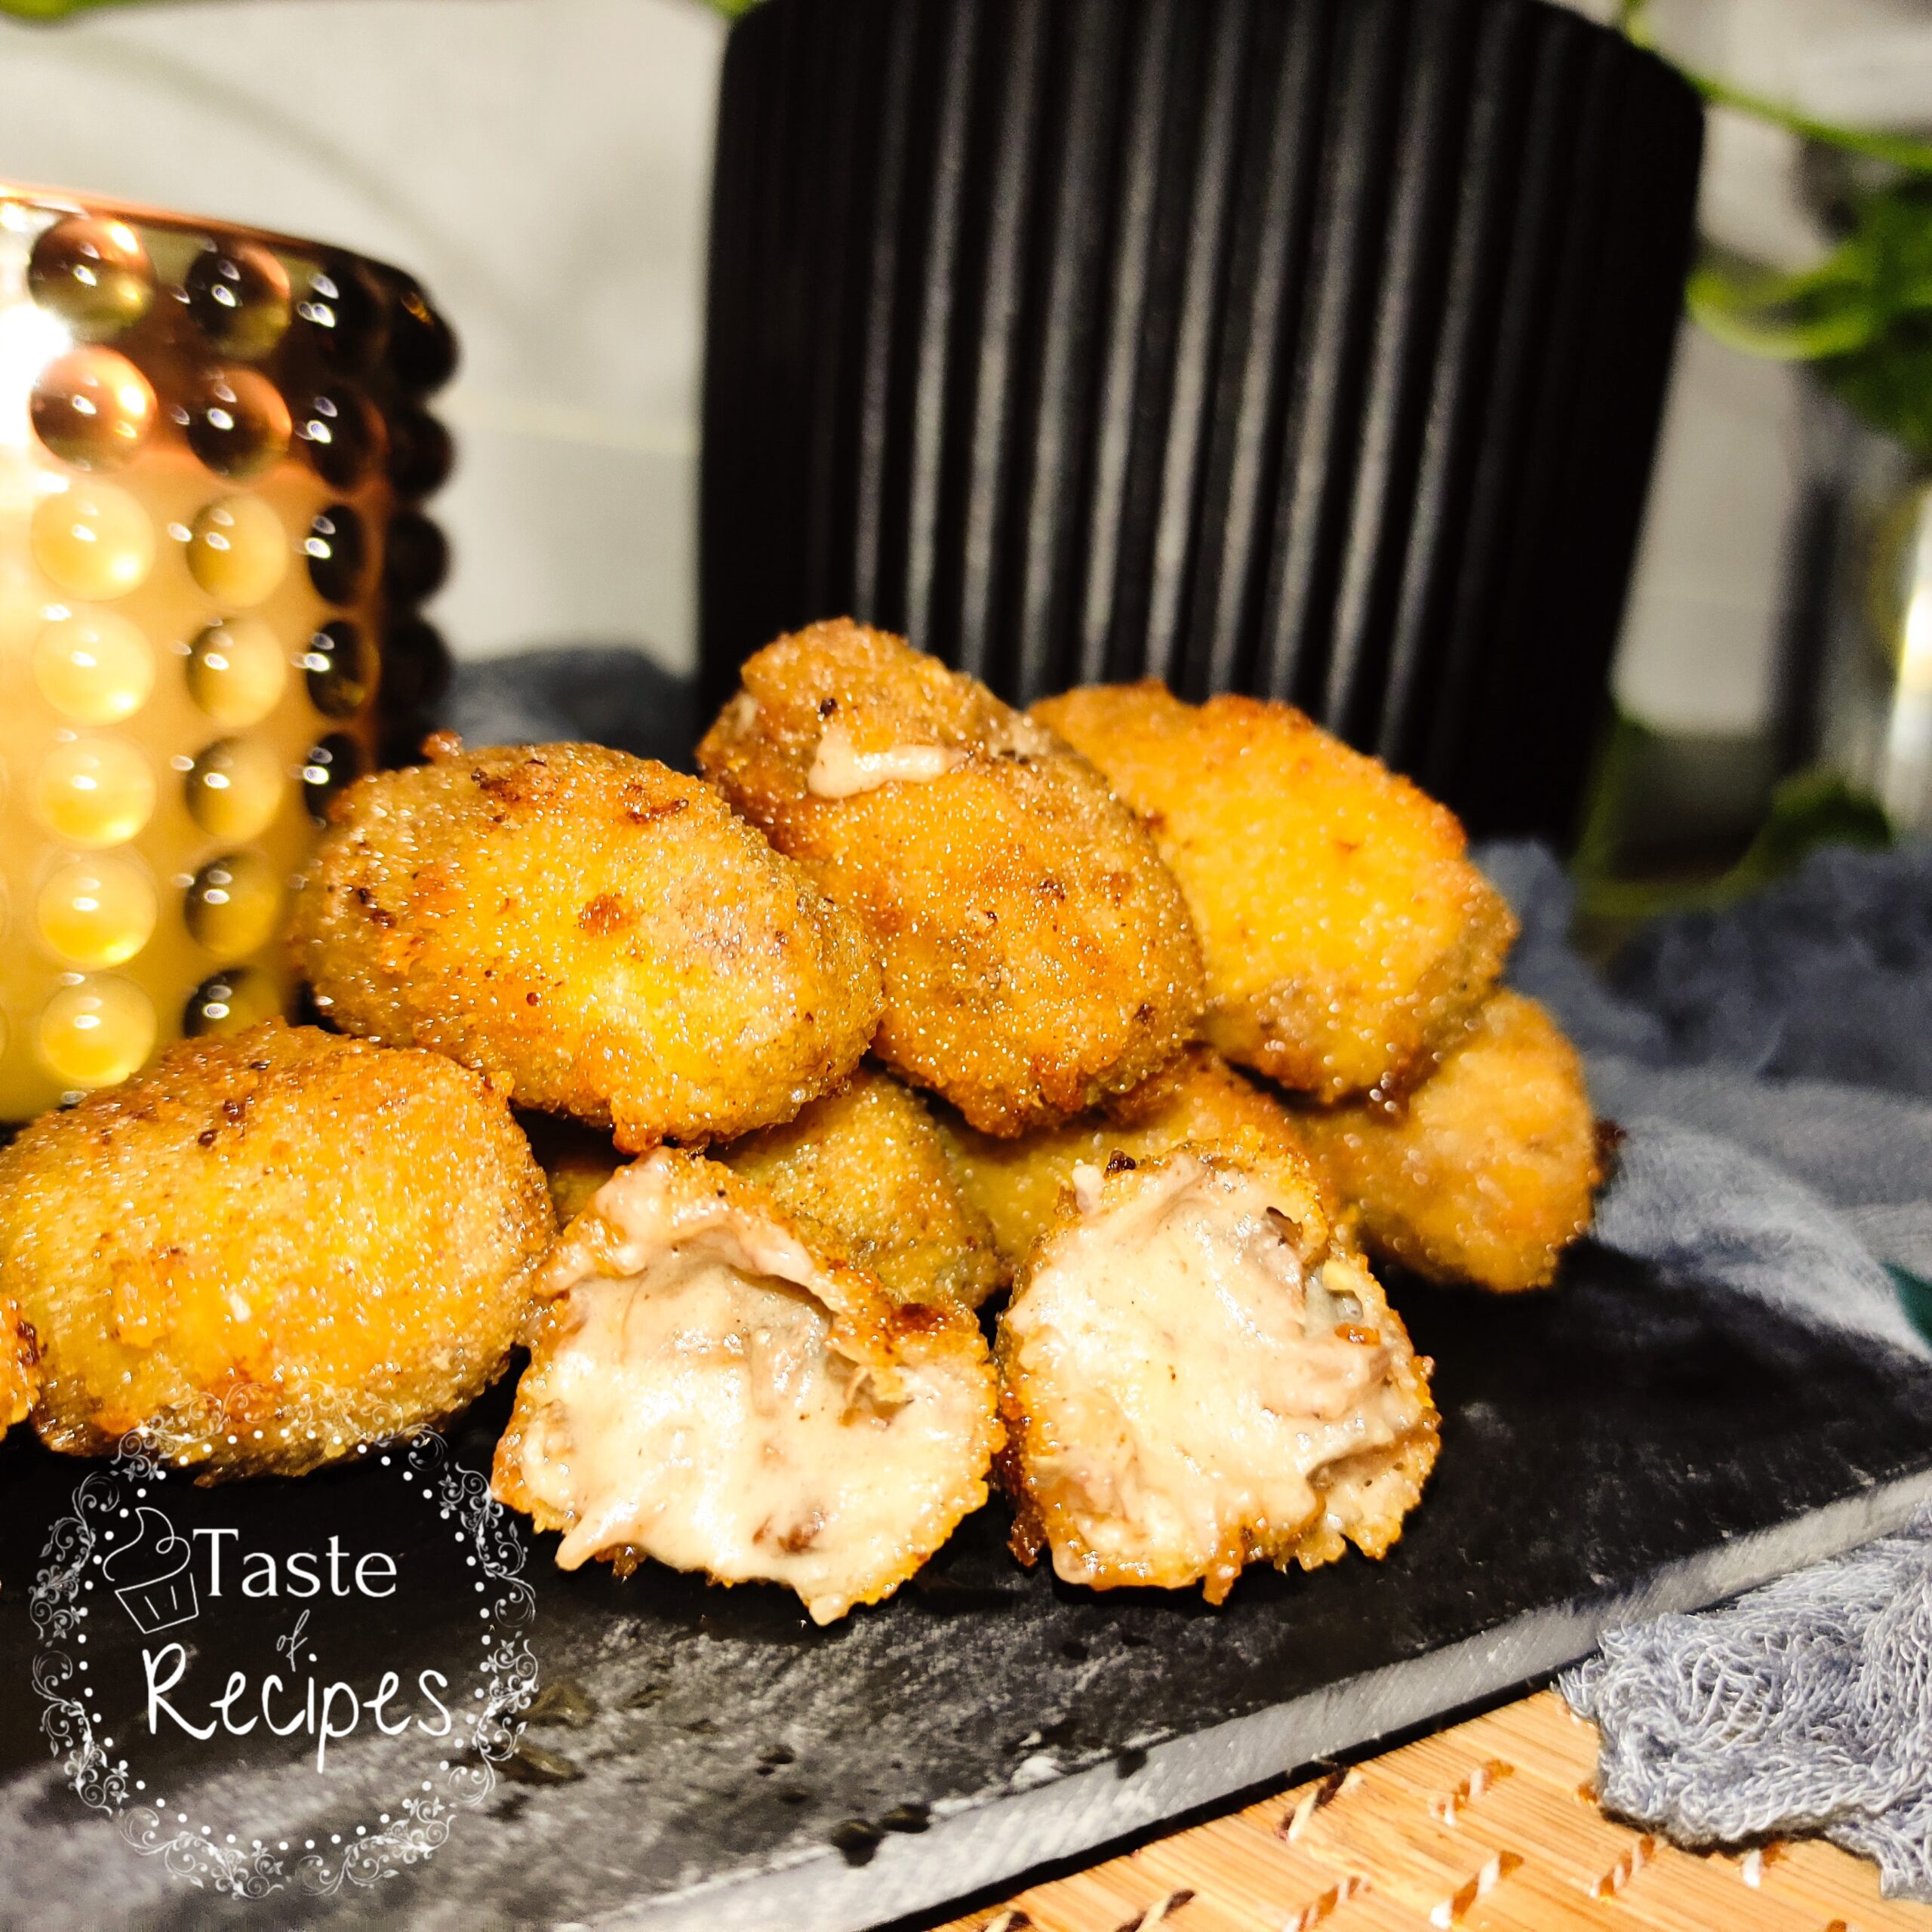 Oxtail croquettes, a haute cuisine recipe within everyone's reach.